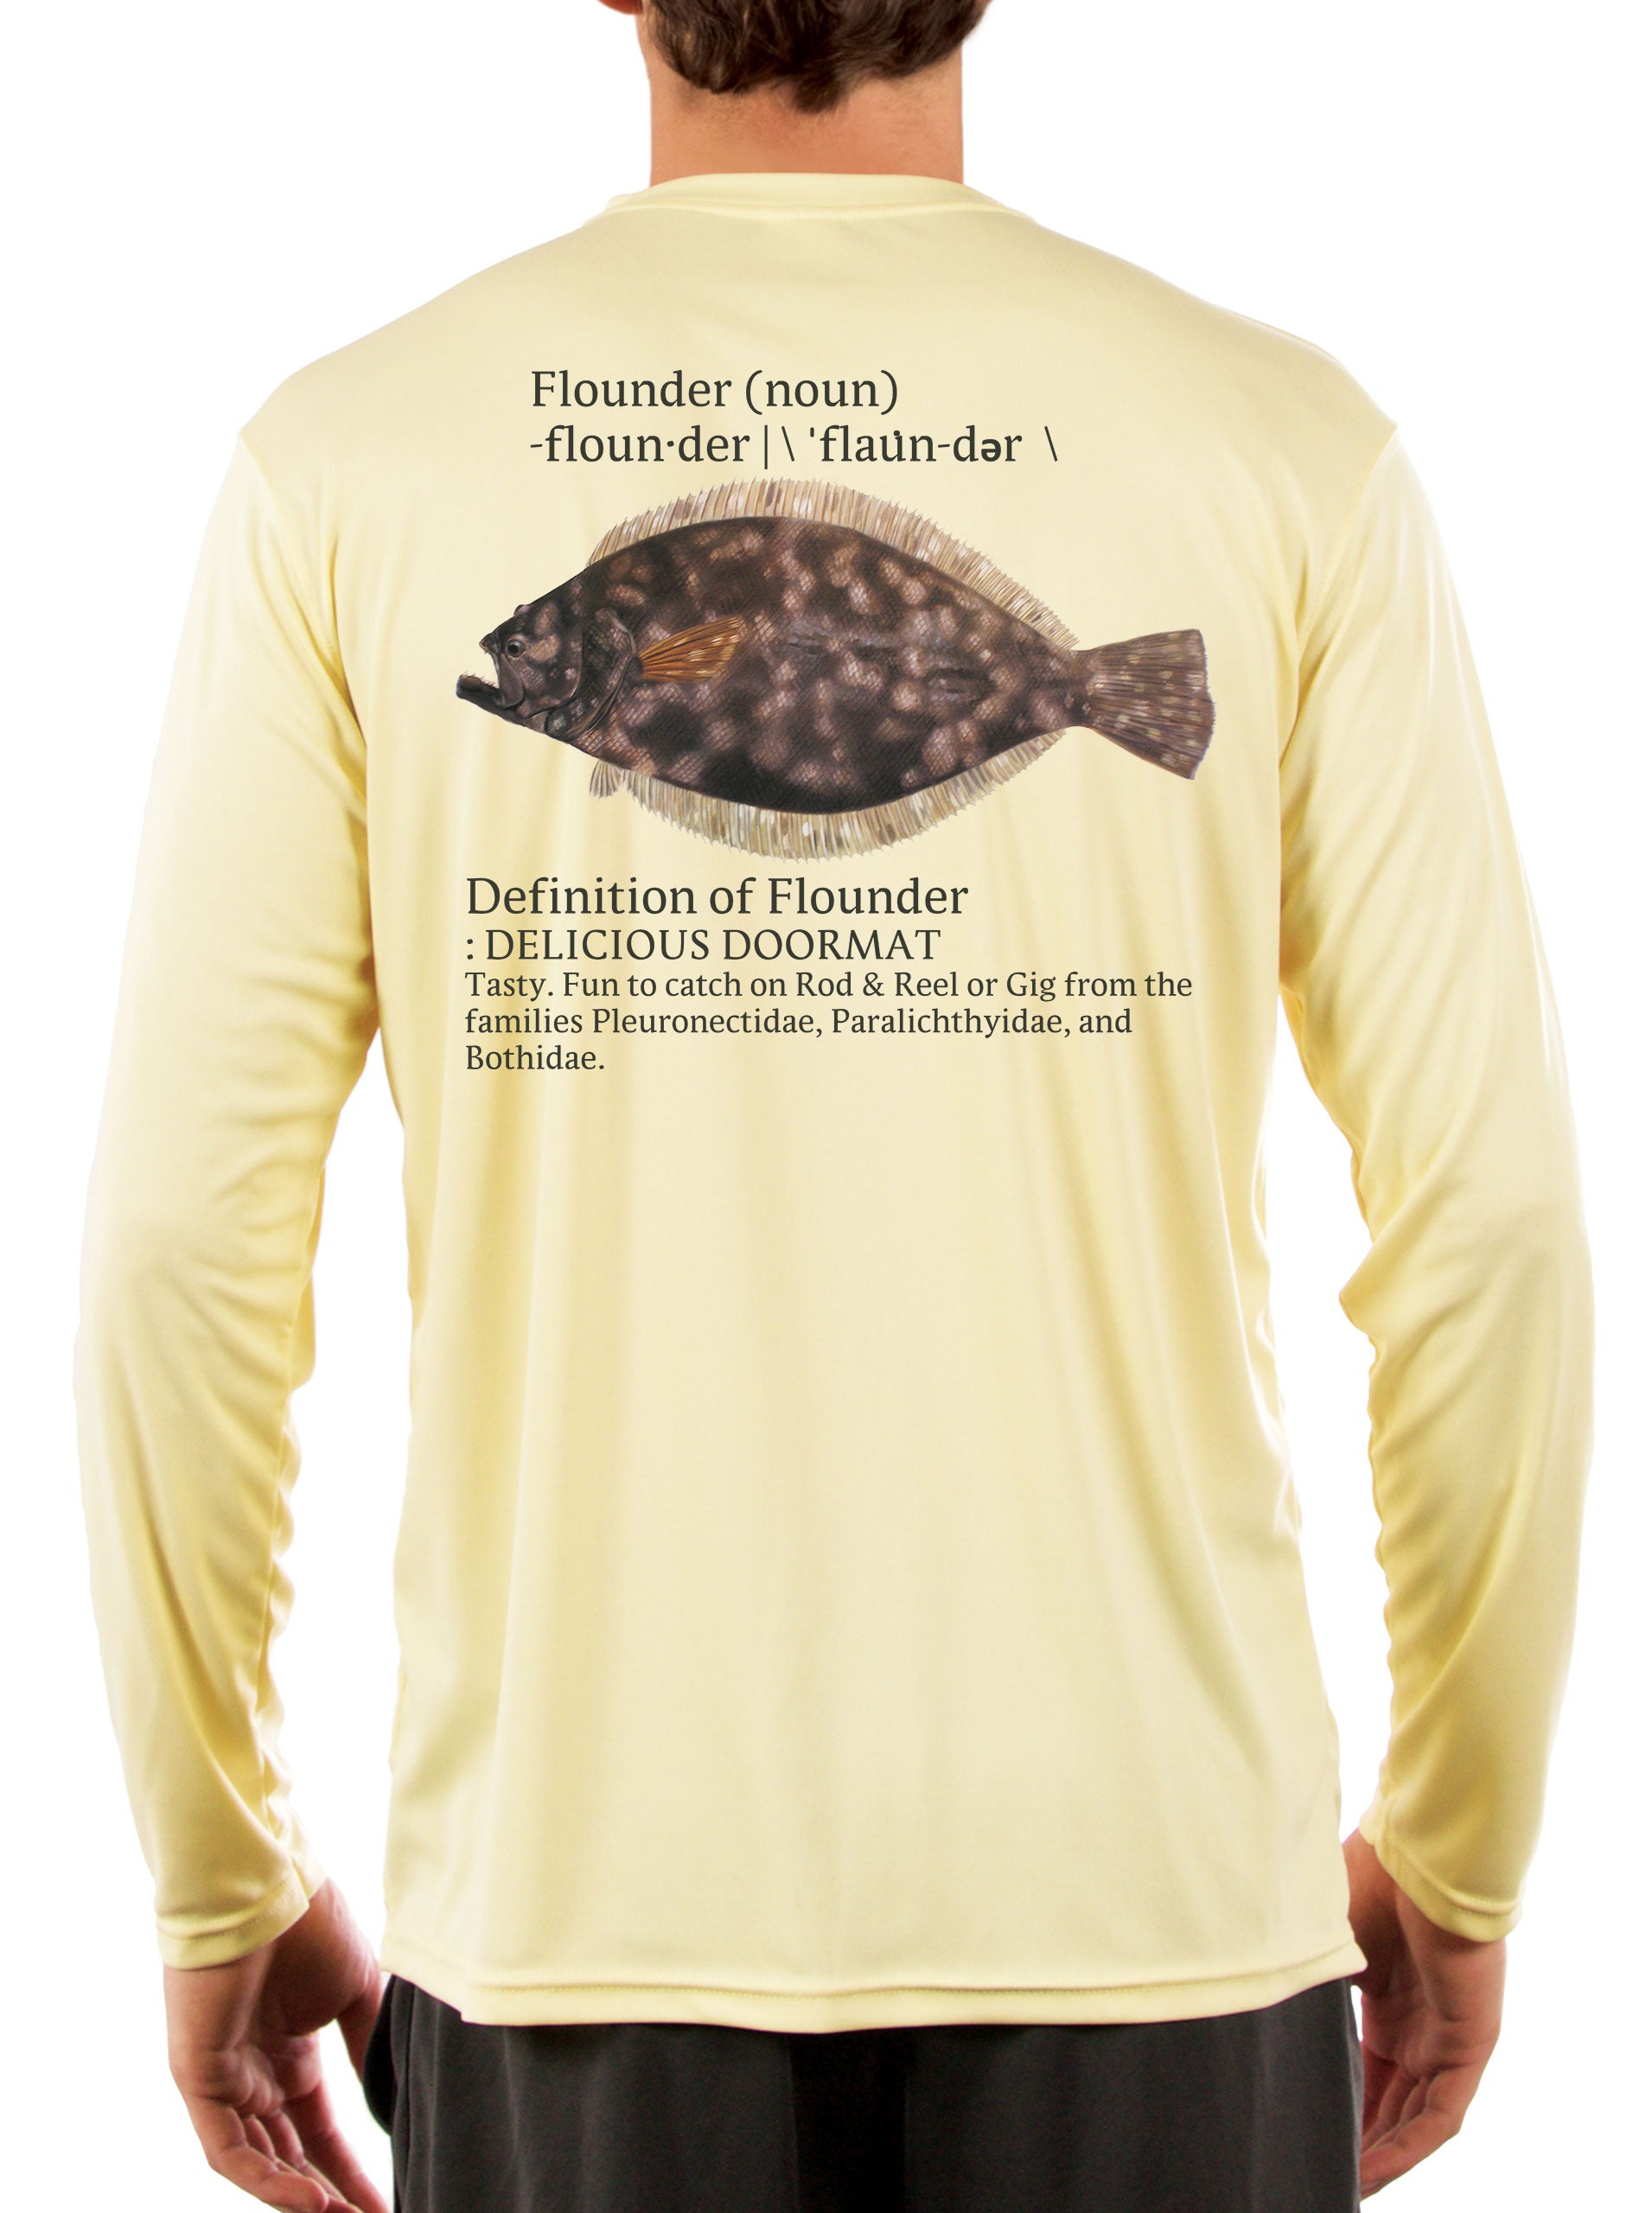 Flounder Fishing Shirts for Men Fluke - UV Protected +50 Sun Protection with Moisture Wicking Technology 2XL / Yellow